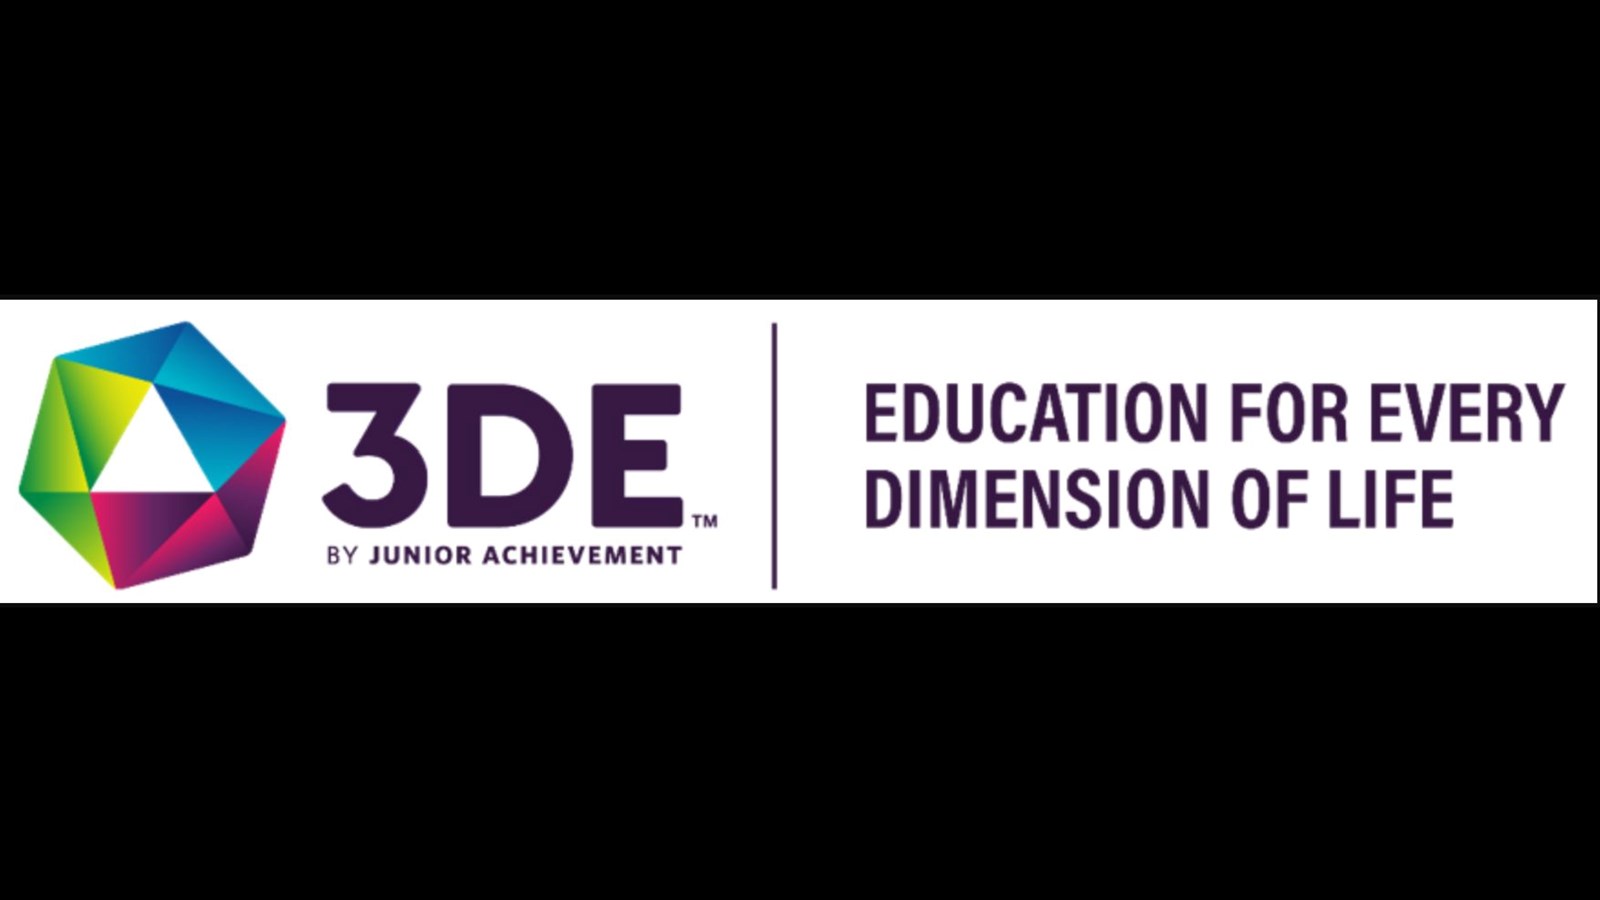 3de education for every dimension of life